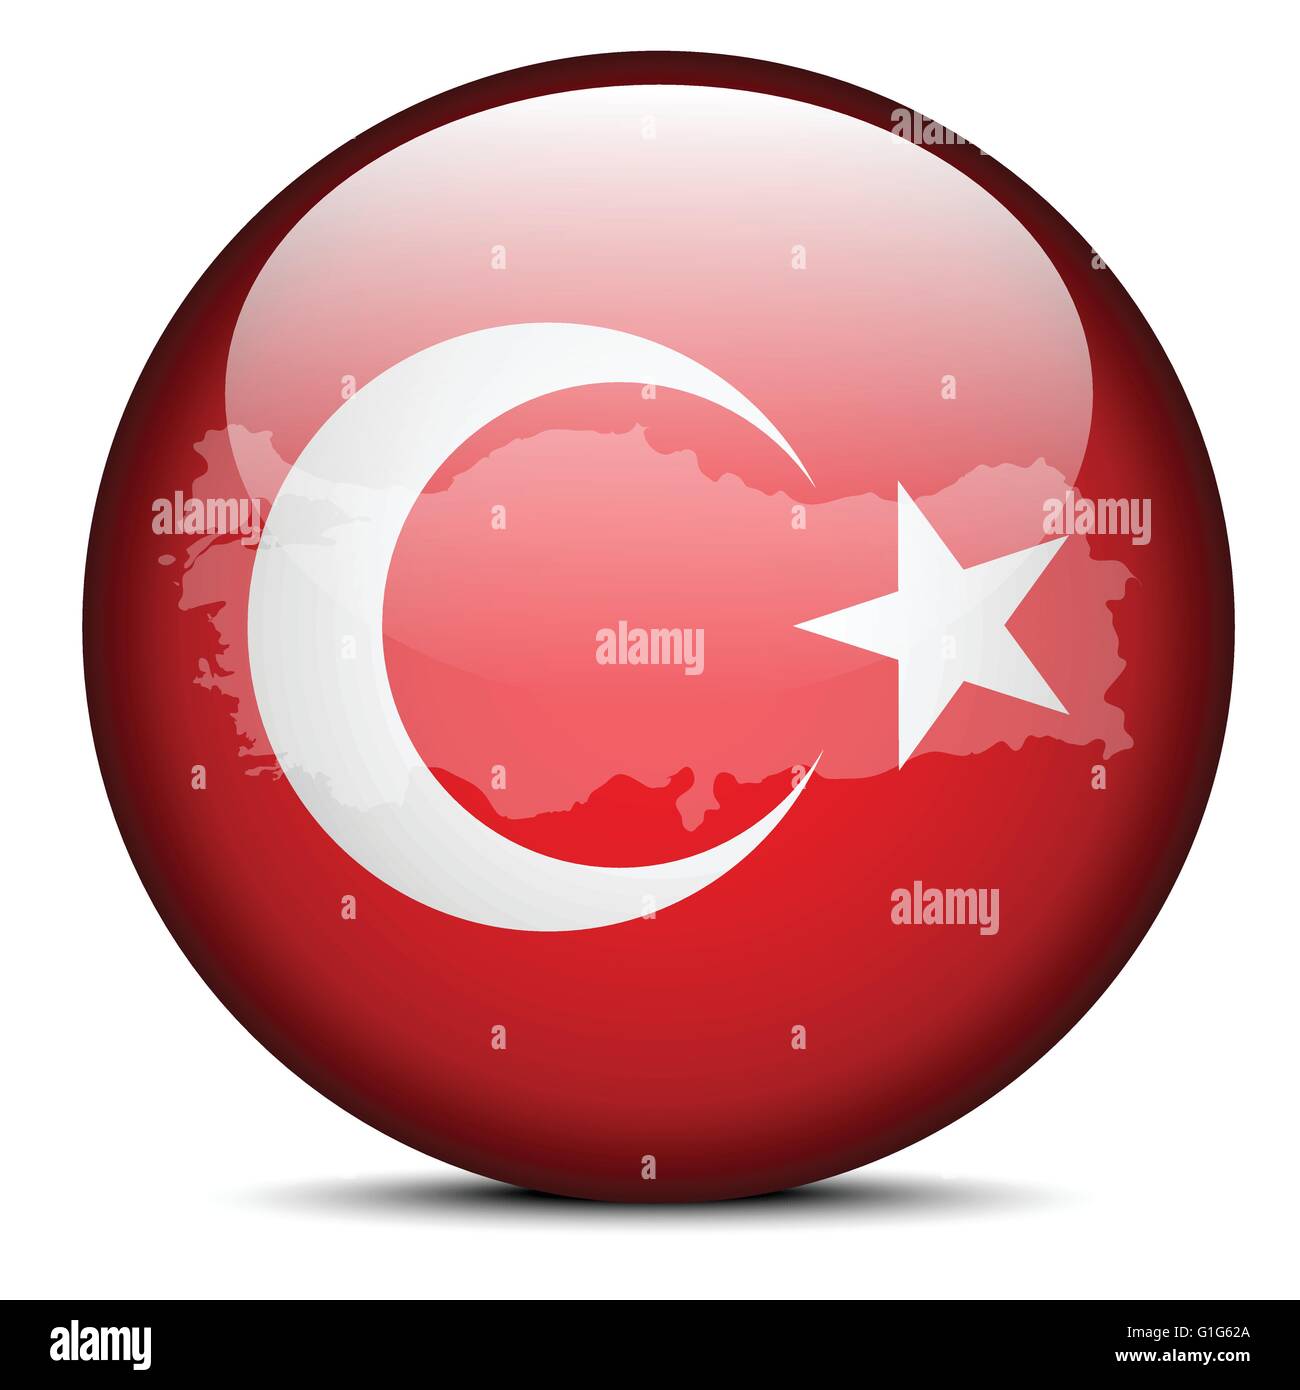 Vector Image - Map on flag button of Republic of Turkey Stock Vector